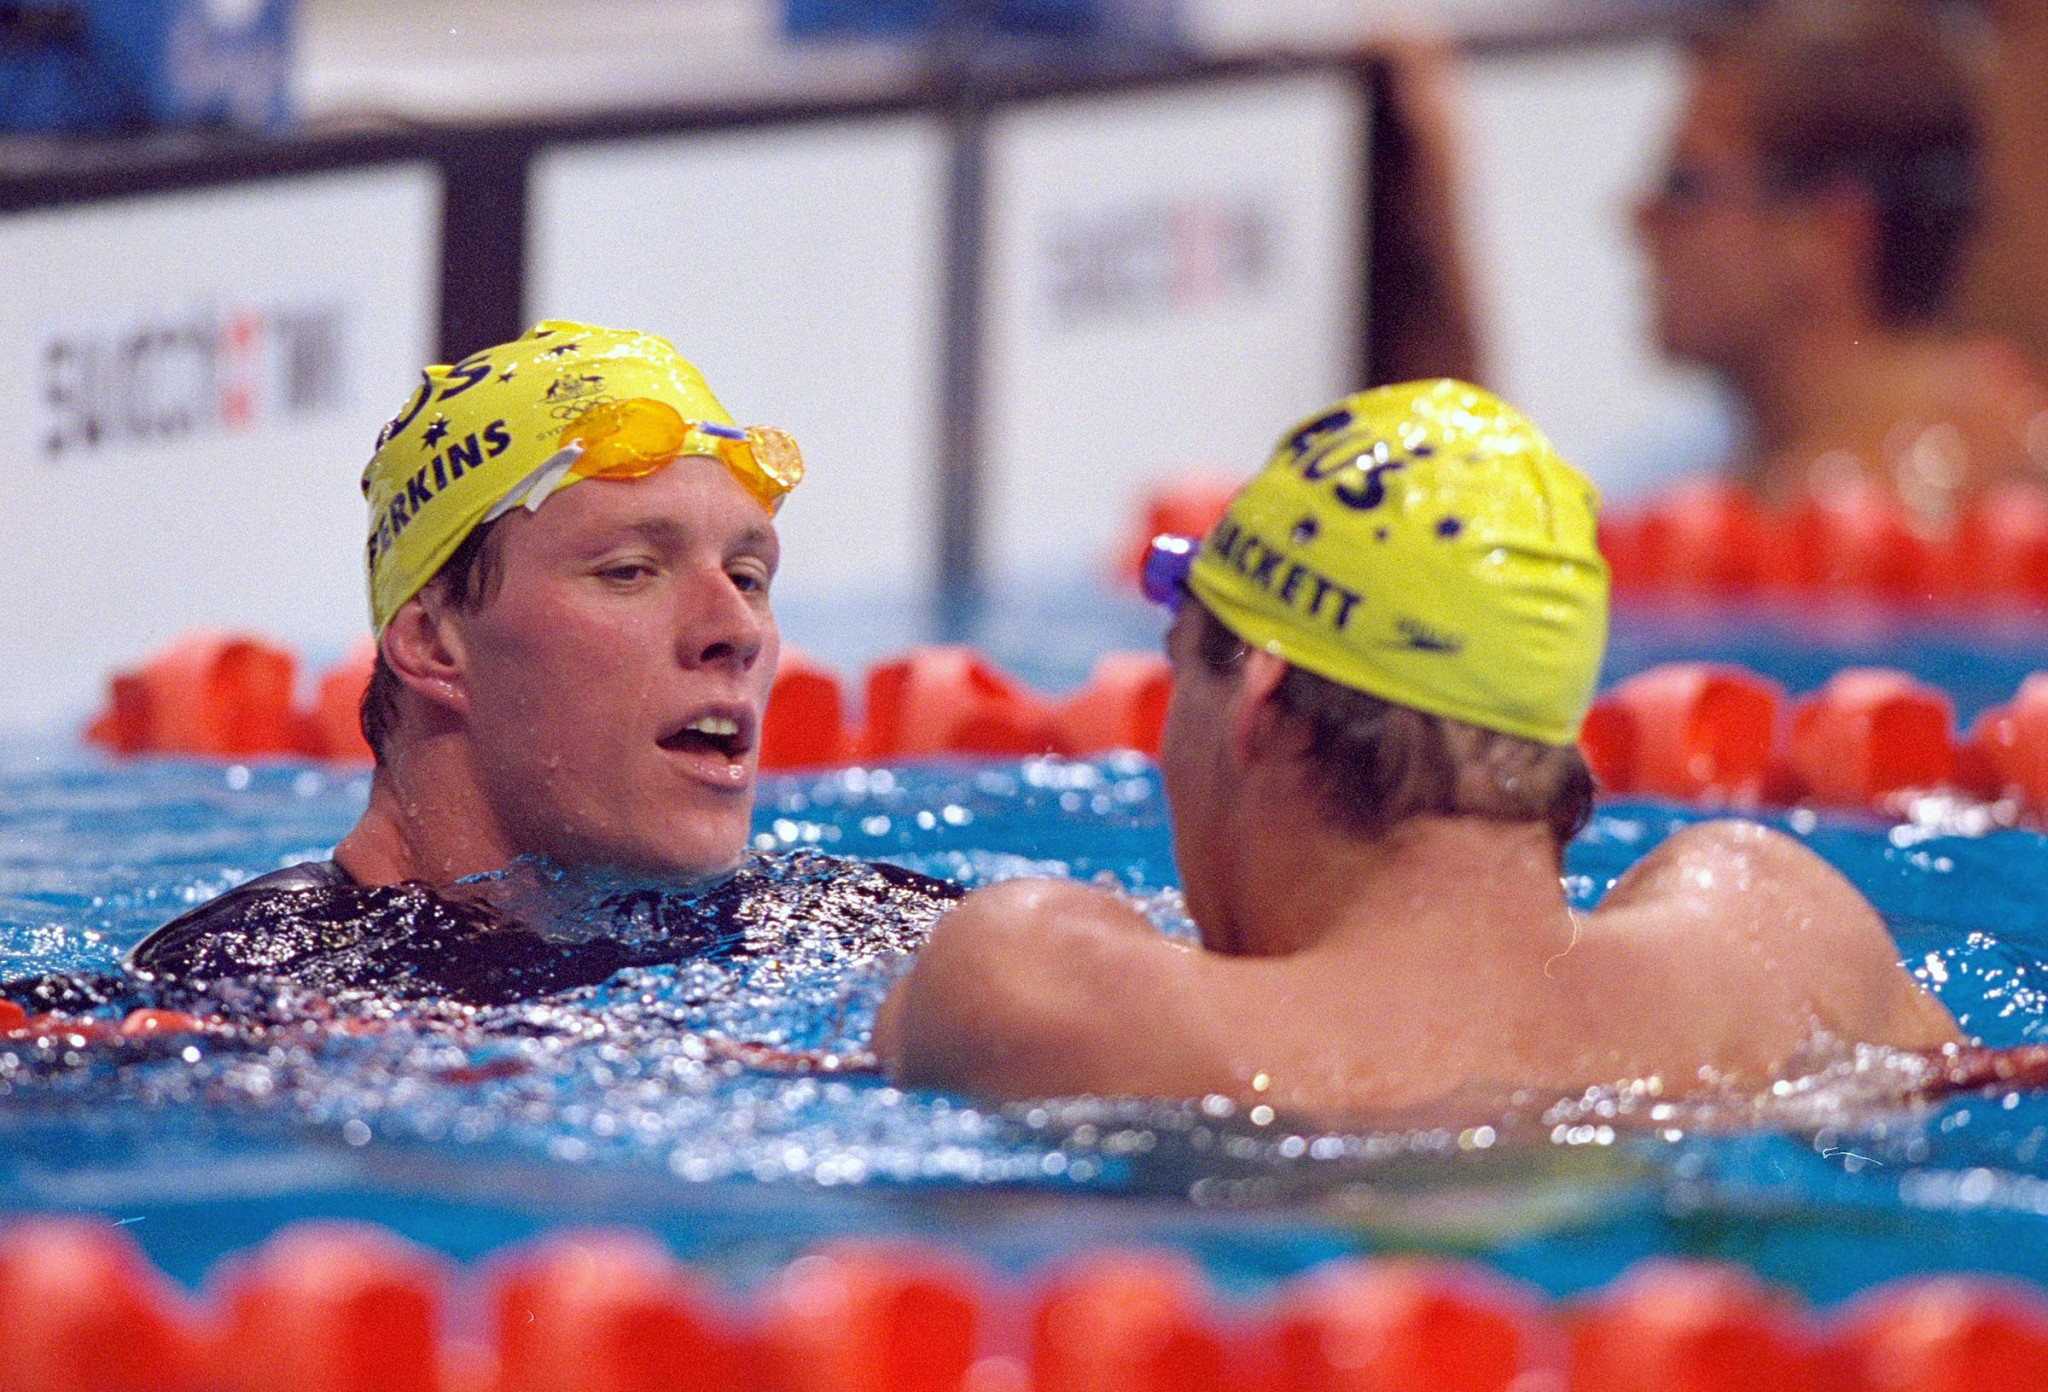 Kieren Perkins clinched gold at Barcelona 1992 and Atlanta 1996 before retiring in 2000 ©Getty Images